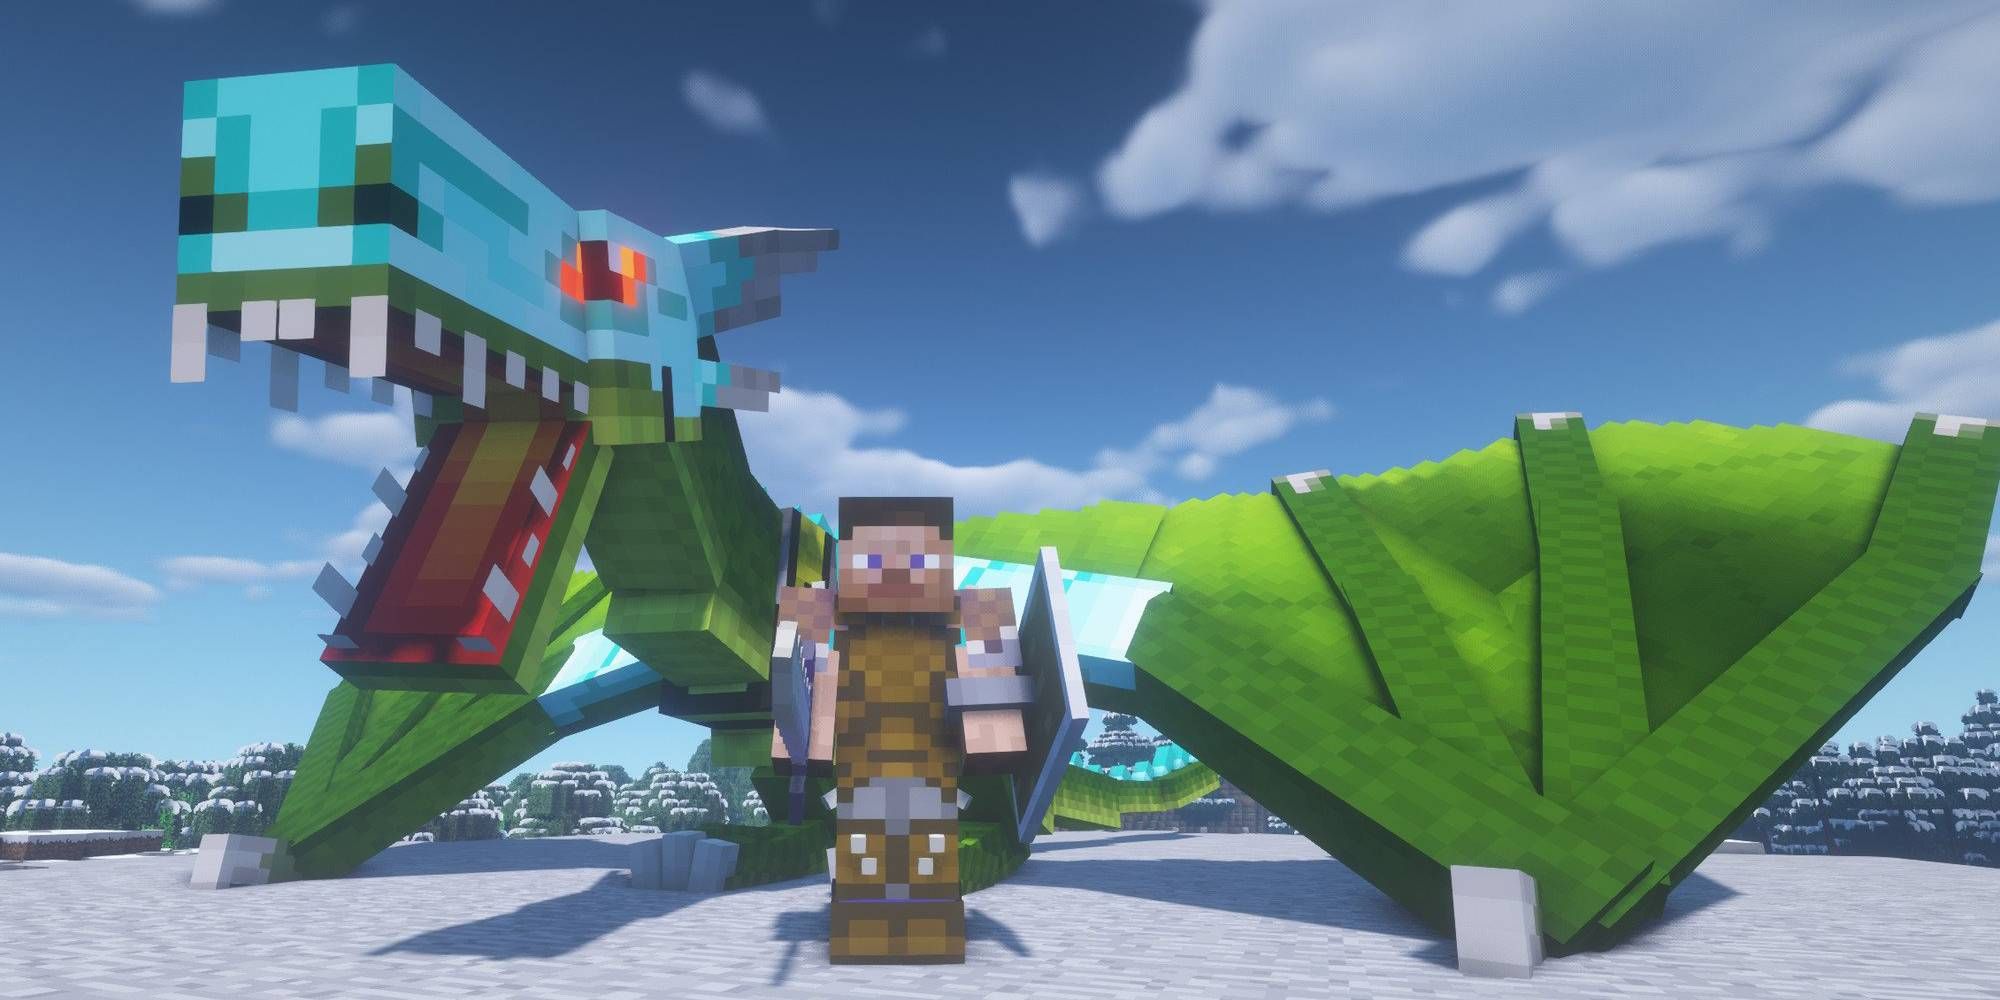 Minecraft RLCraft Mod Dragon Mob with Player as Tamed Creature Found in Ultra Difficult Survival Mode